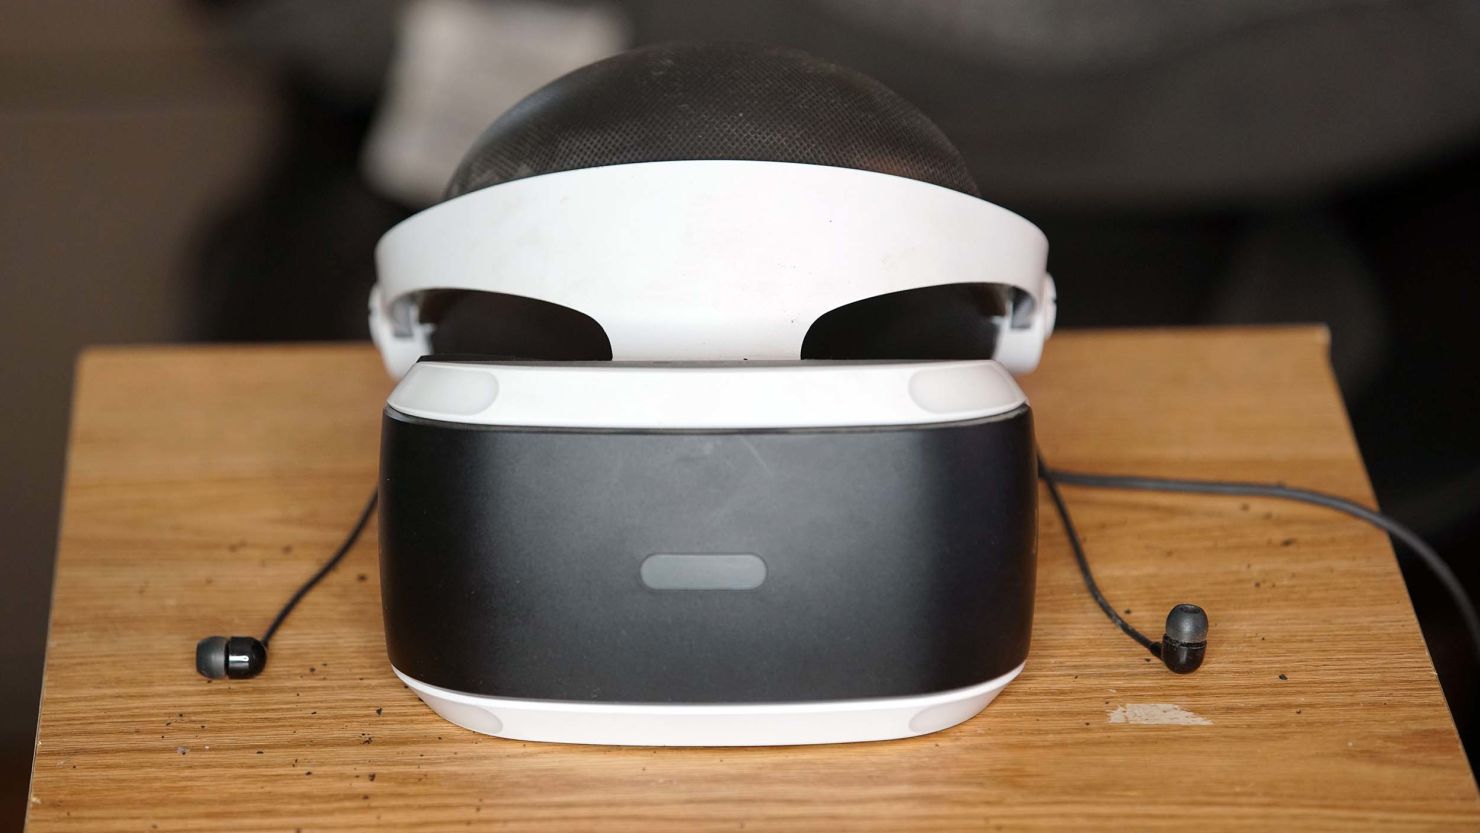 Interested in PlayStation VR? You're going to need a separate PS4